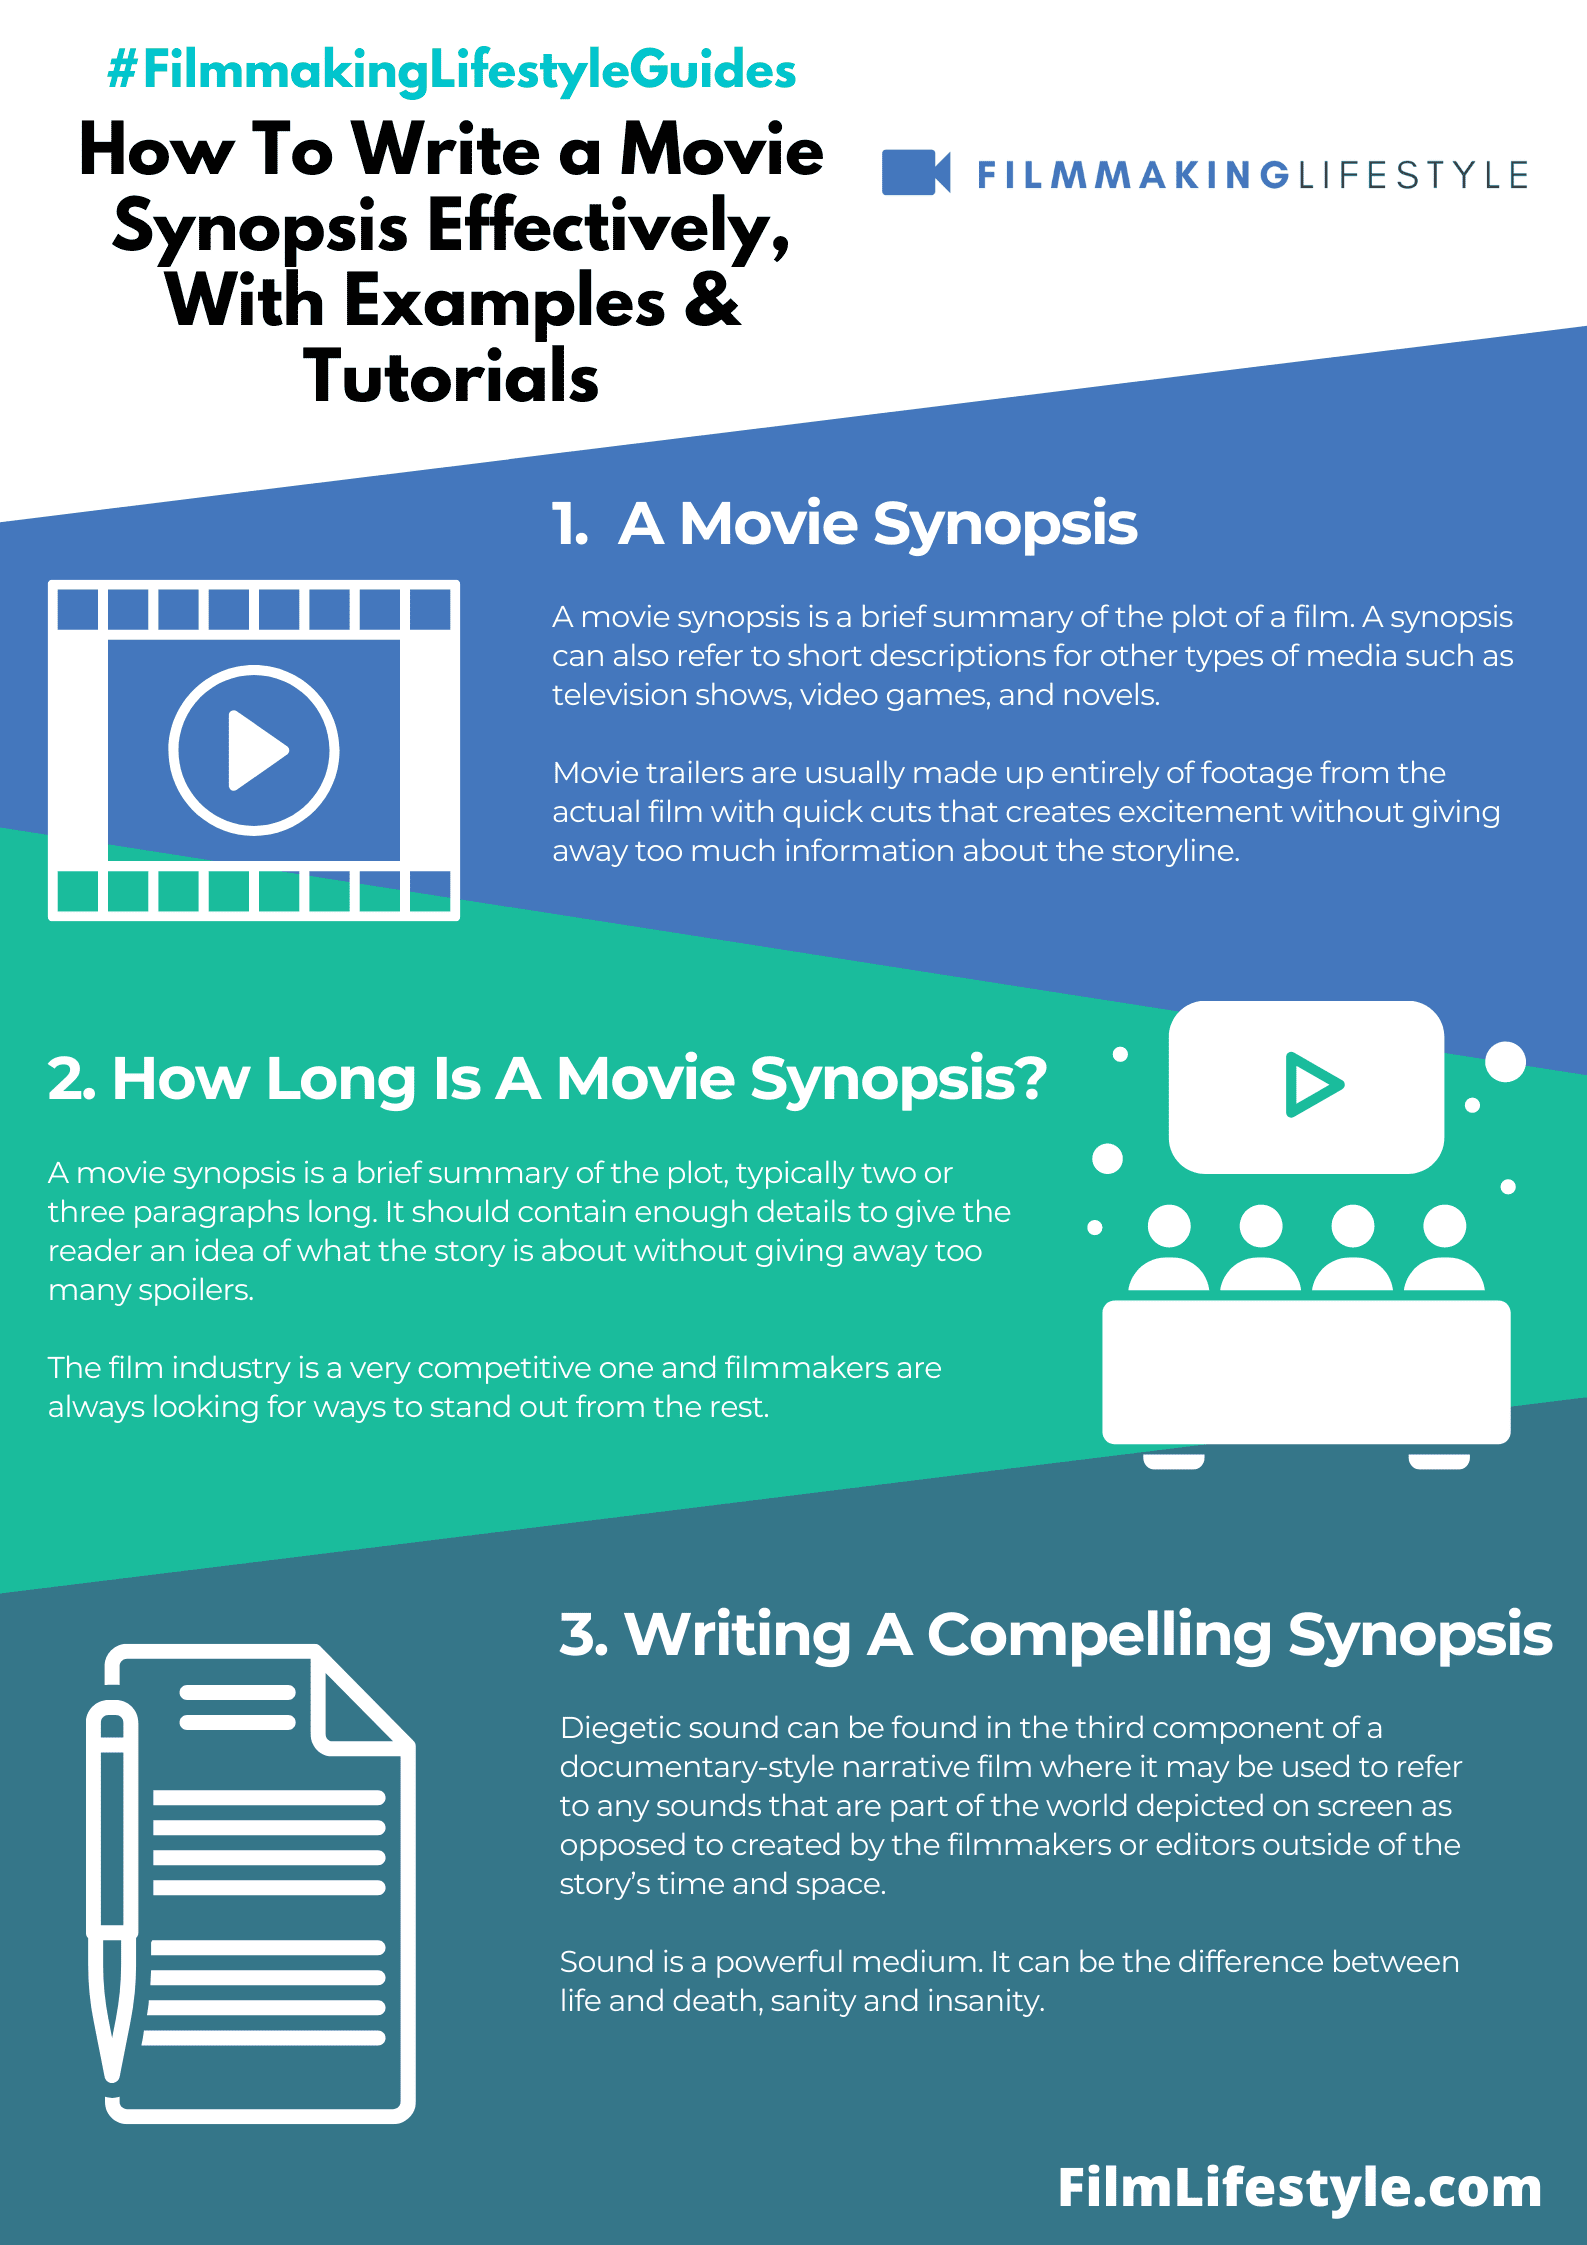 How To Write a Movie Synopsis